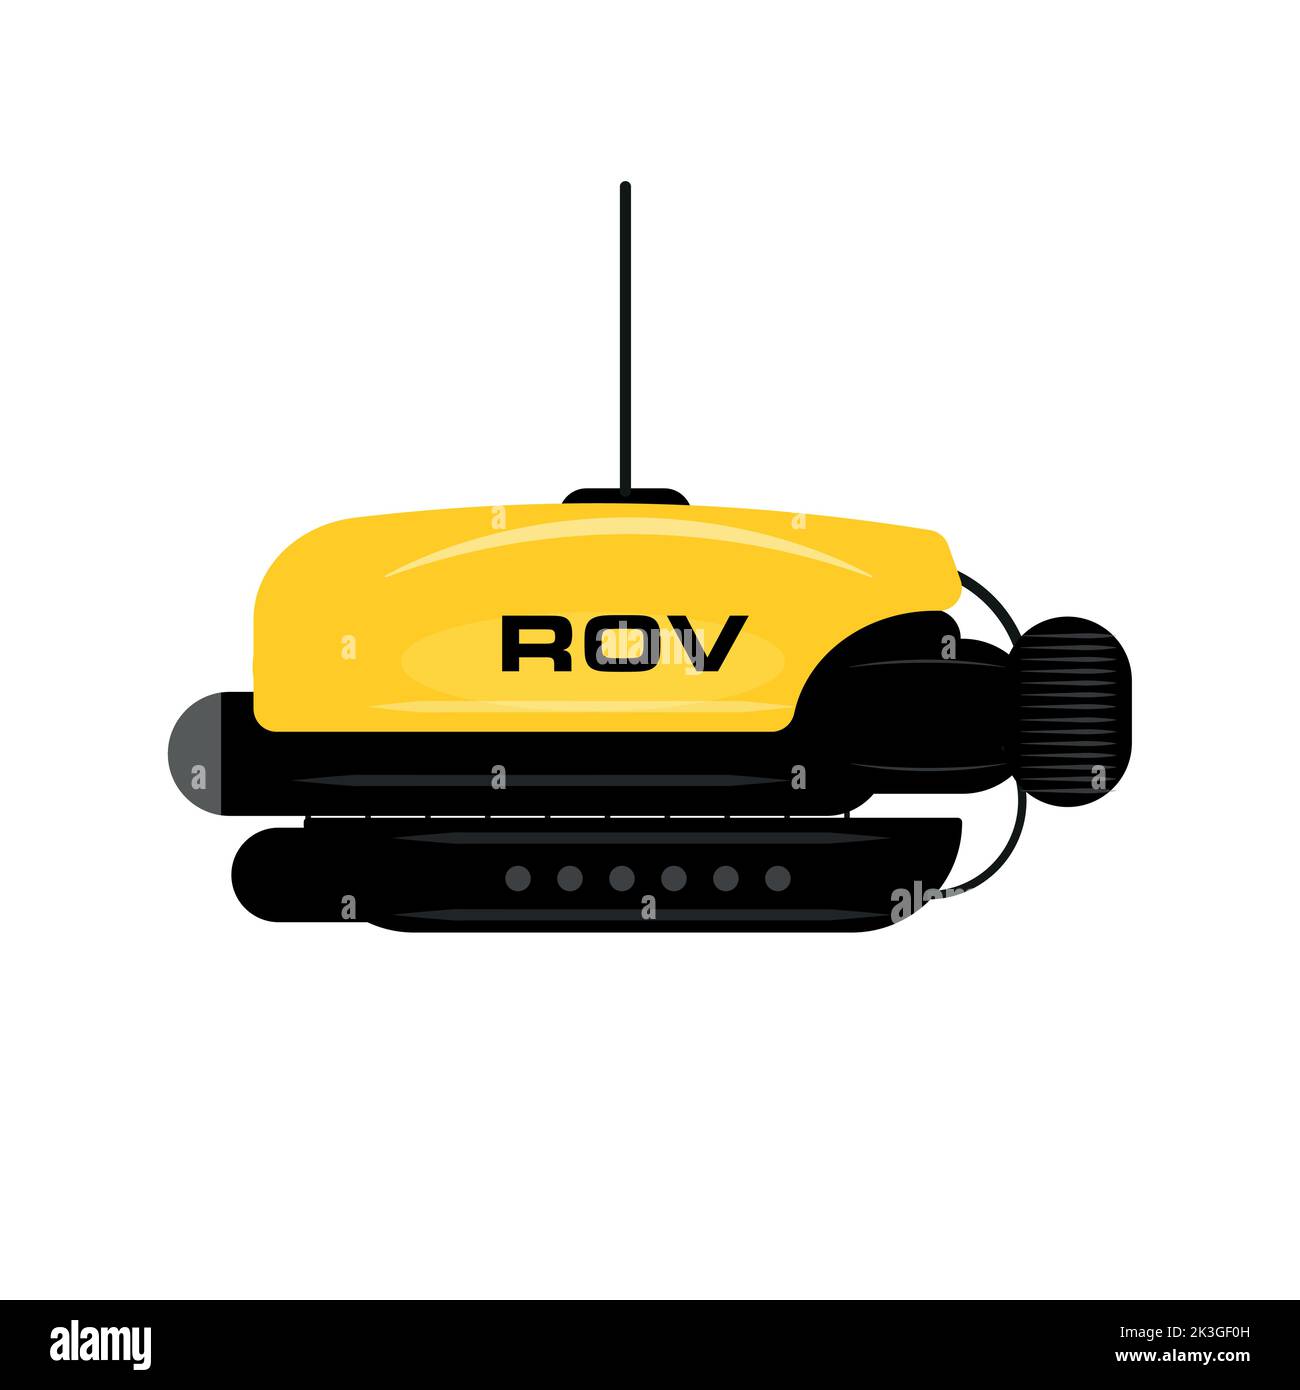 ROV - Remotely Operated Vehicle vector Illustration Stock Vector